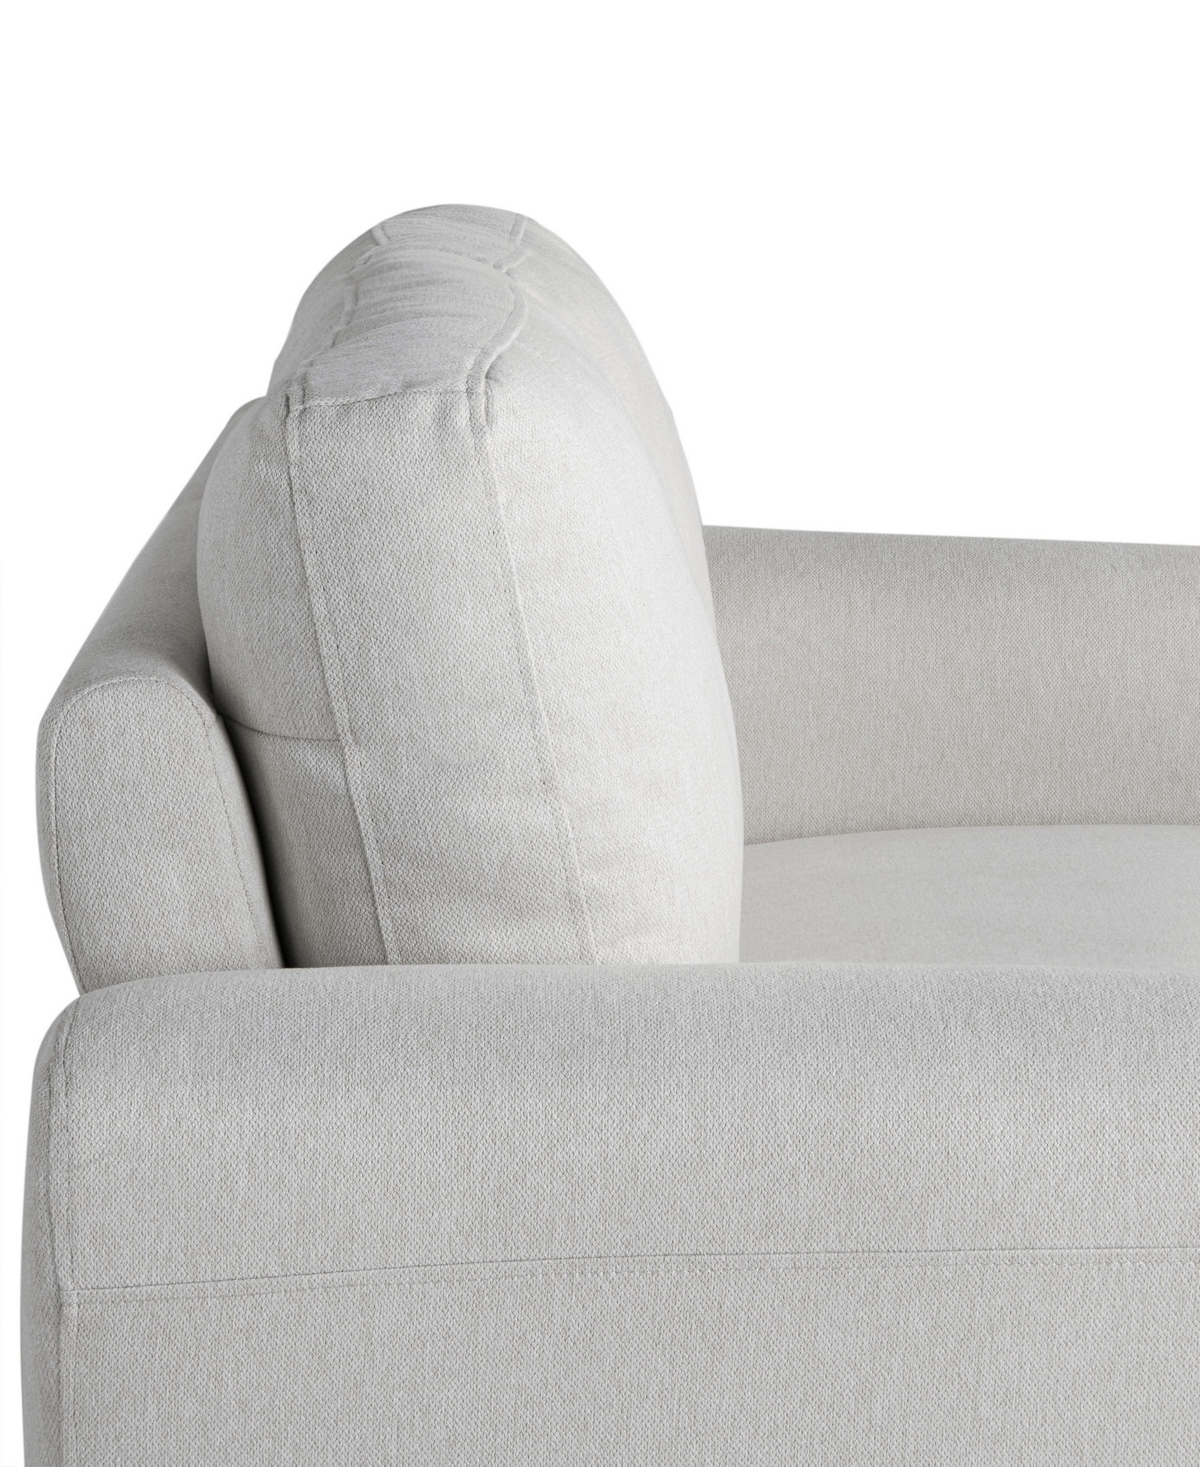 Shop Lifestyle Solutions 57.9" Microfiber Wilshire Loveseat With Rolled Arms In Oyster